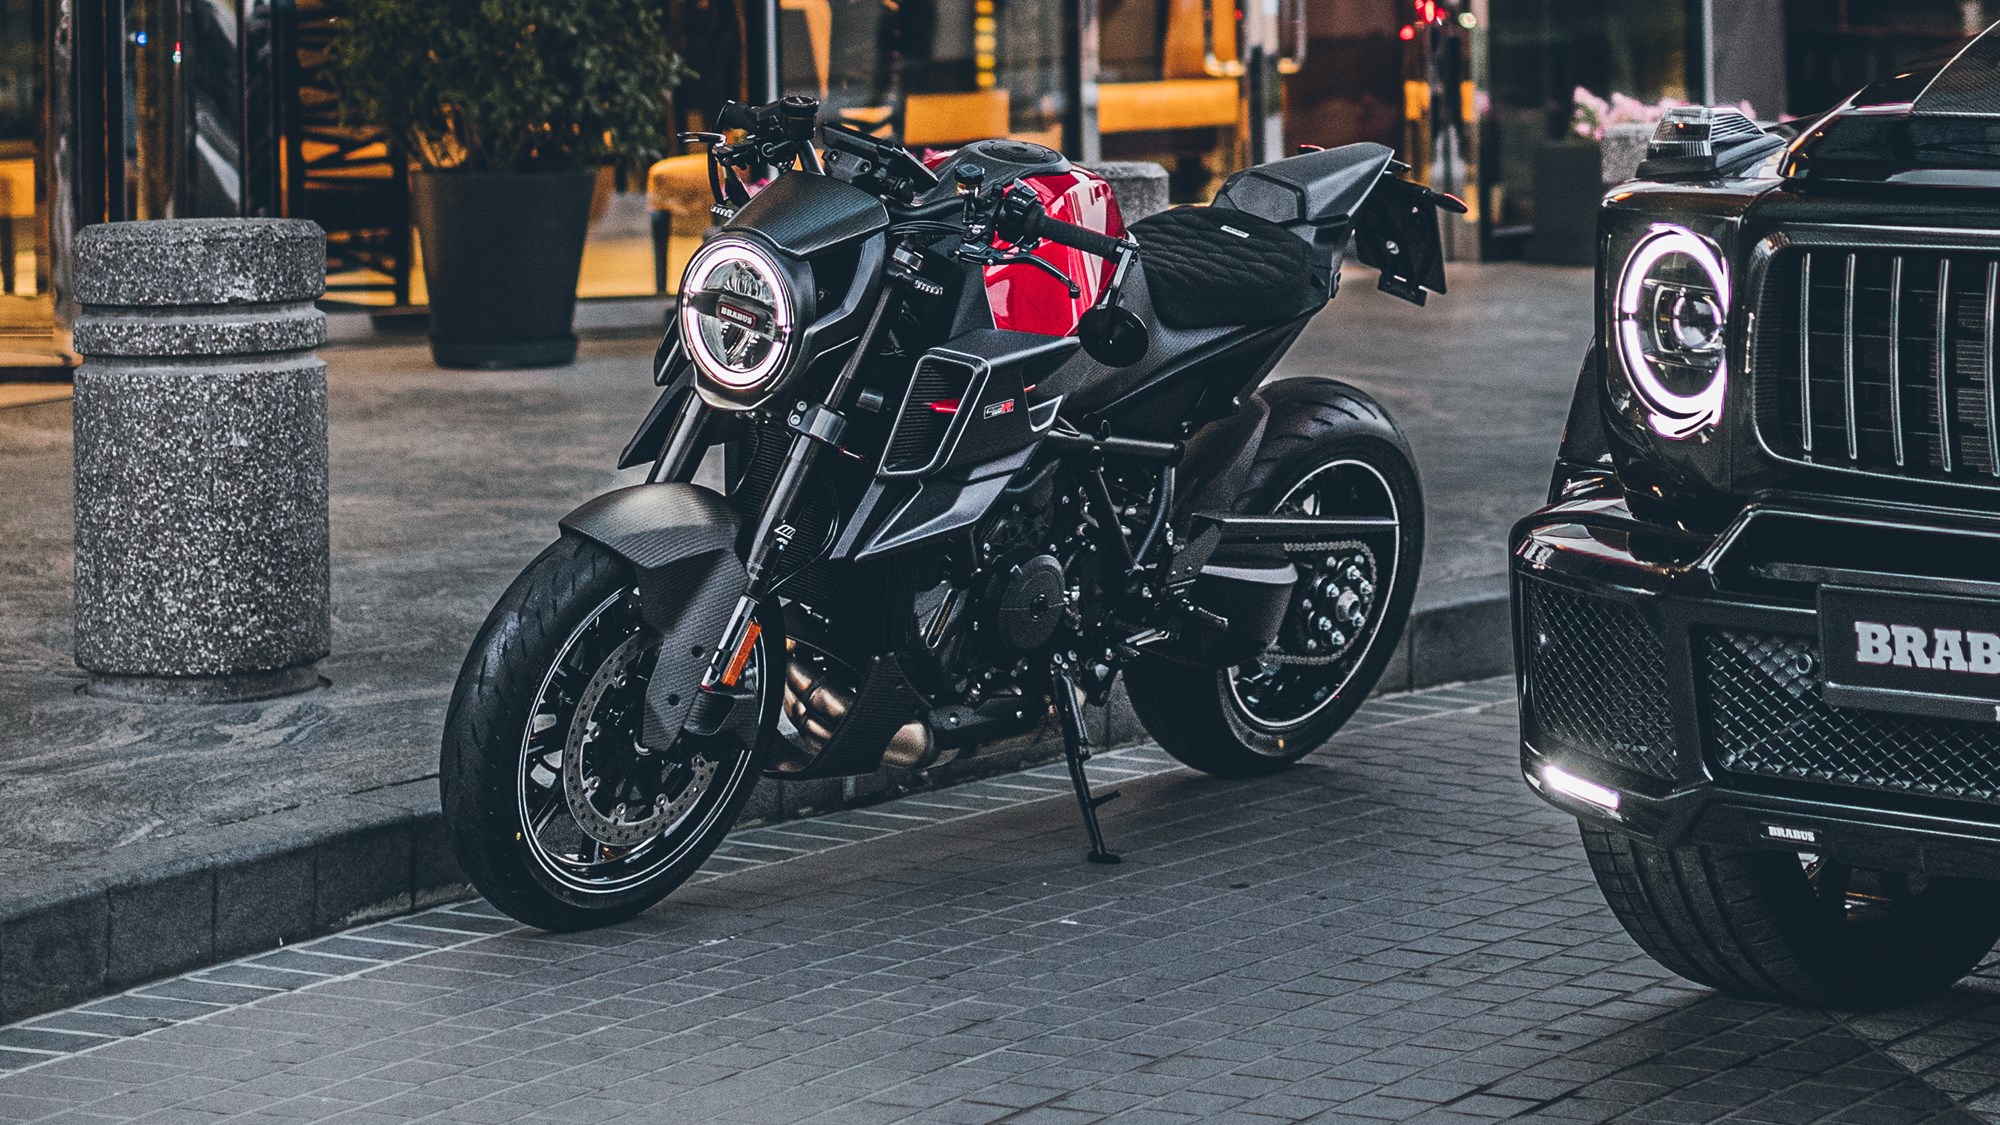 A view of the Brabus 1300 R motorcycle, courtesy of KTM and Brabus